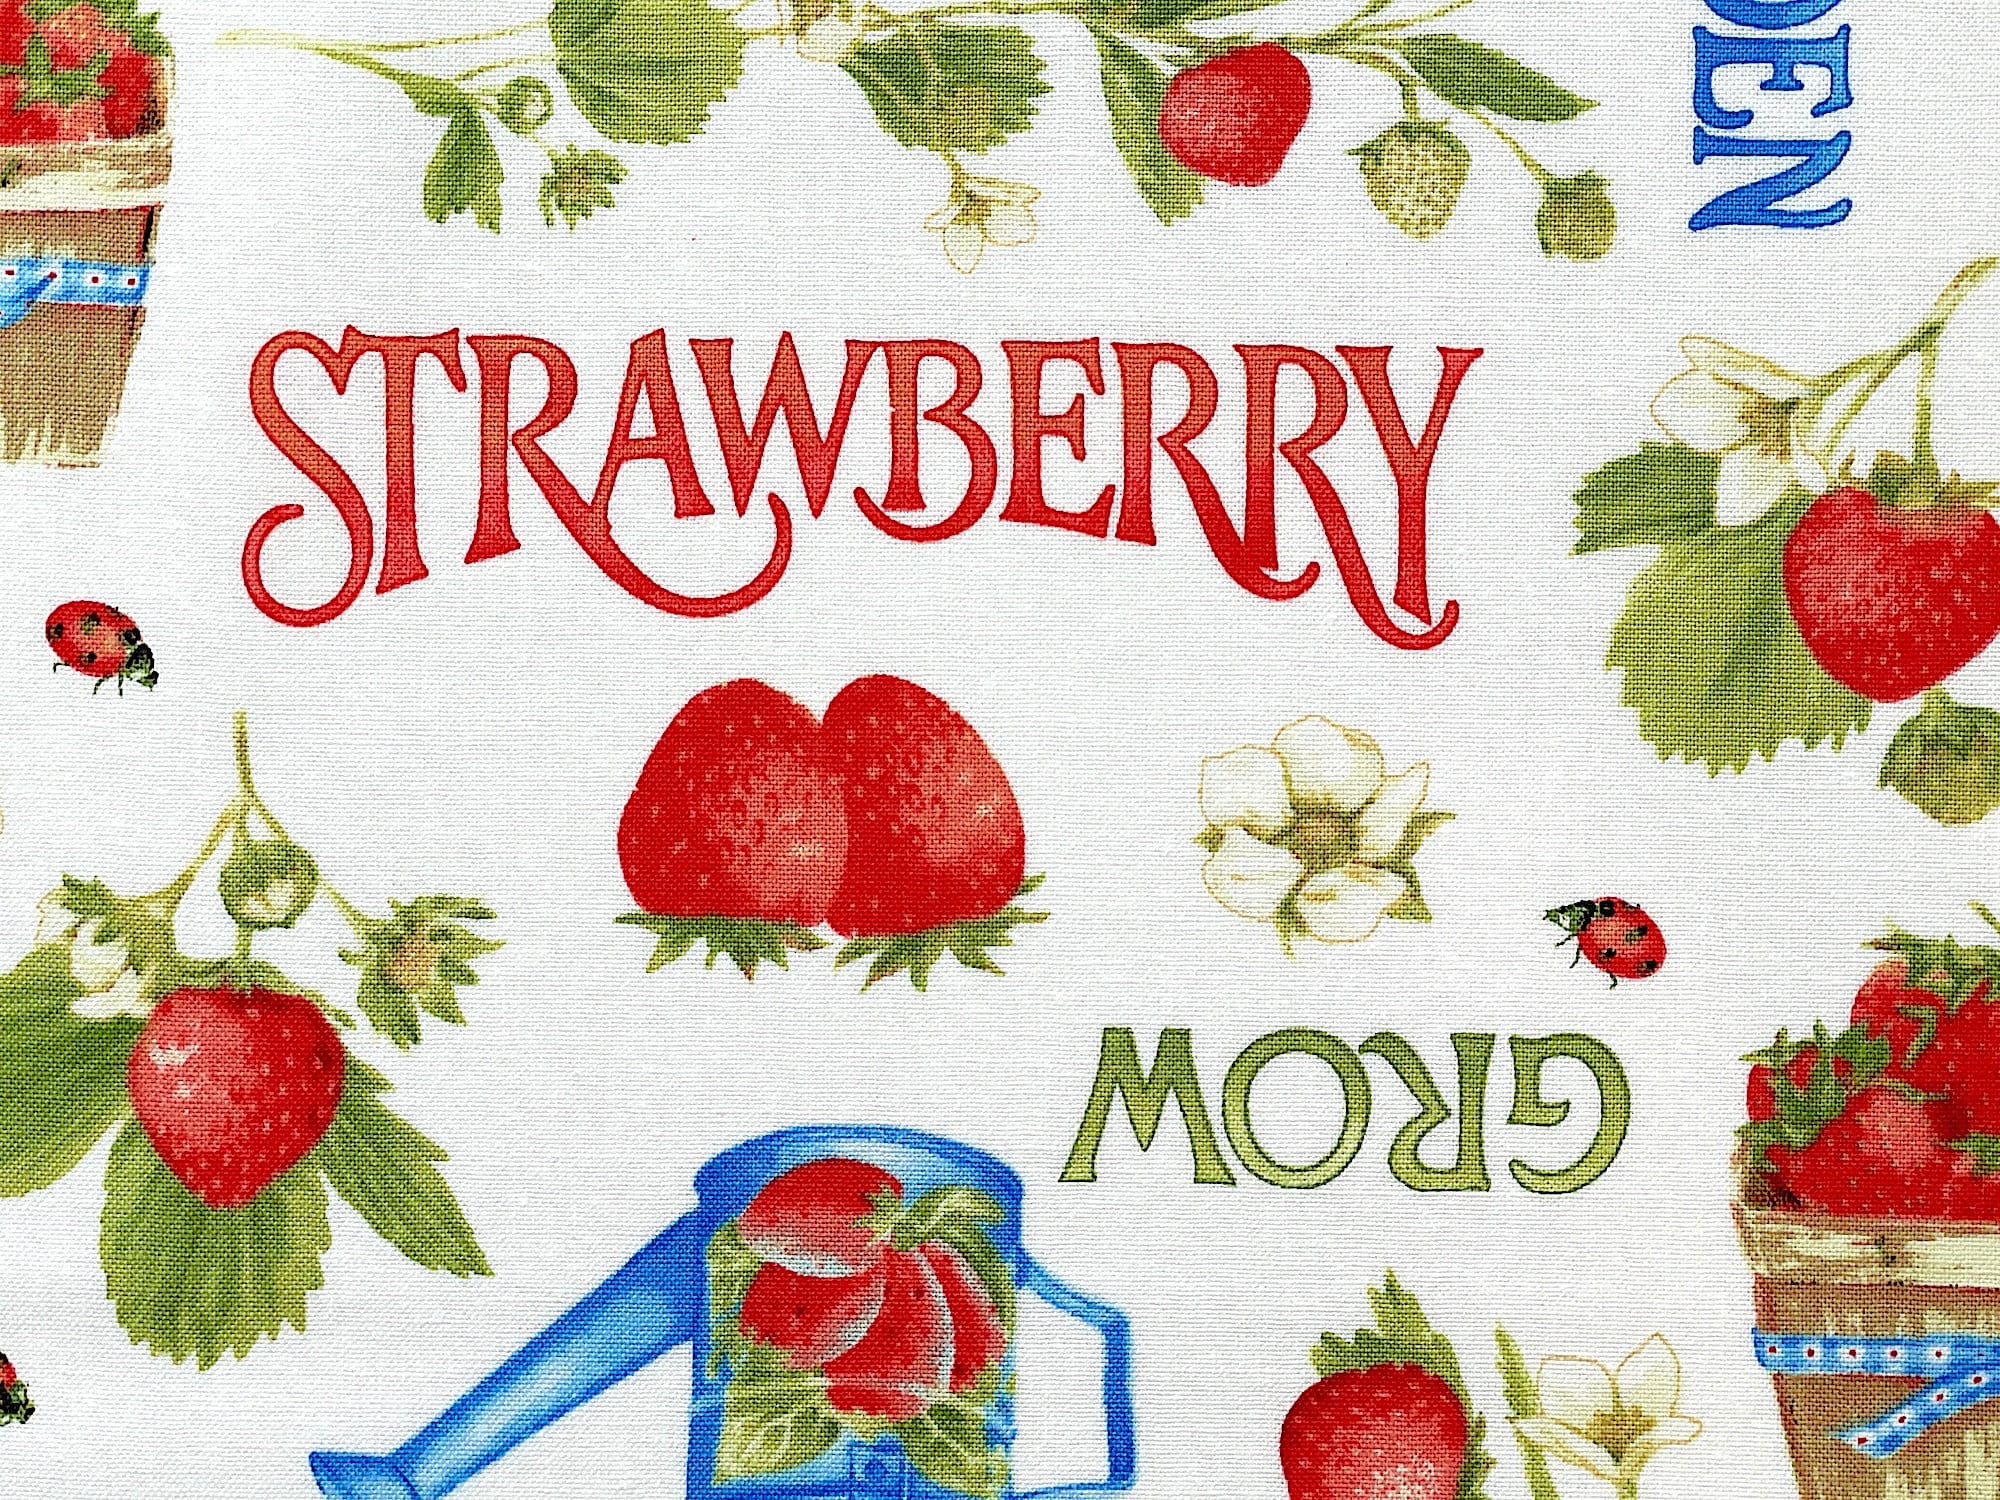 Close up of the word strawberry and some strawberries